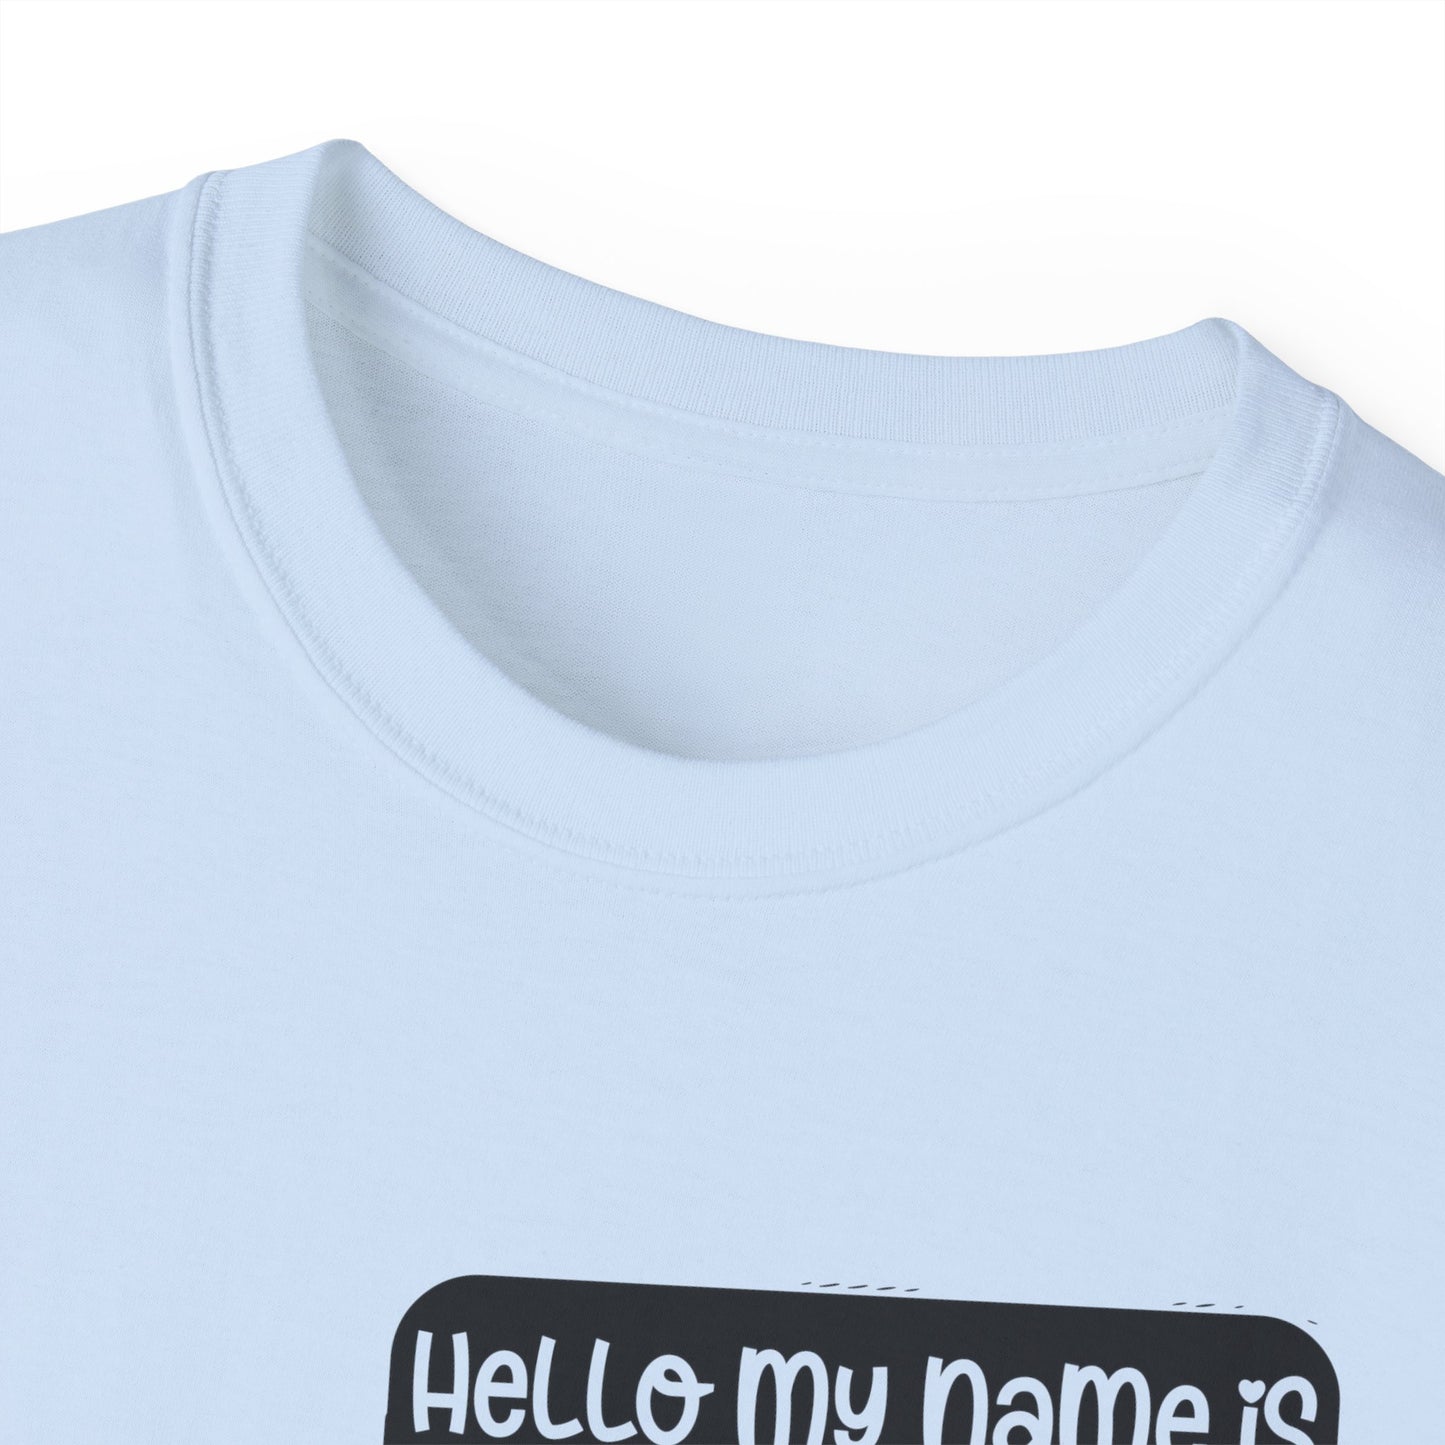 HELLO MY NAME IS CHILD OF THE ONE TRUE KING FUNNY Unisex Christian Ultra Cotton Tee Printify